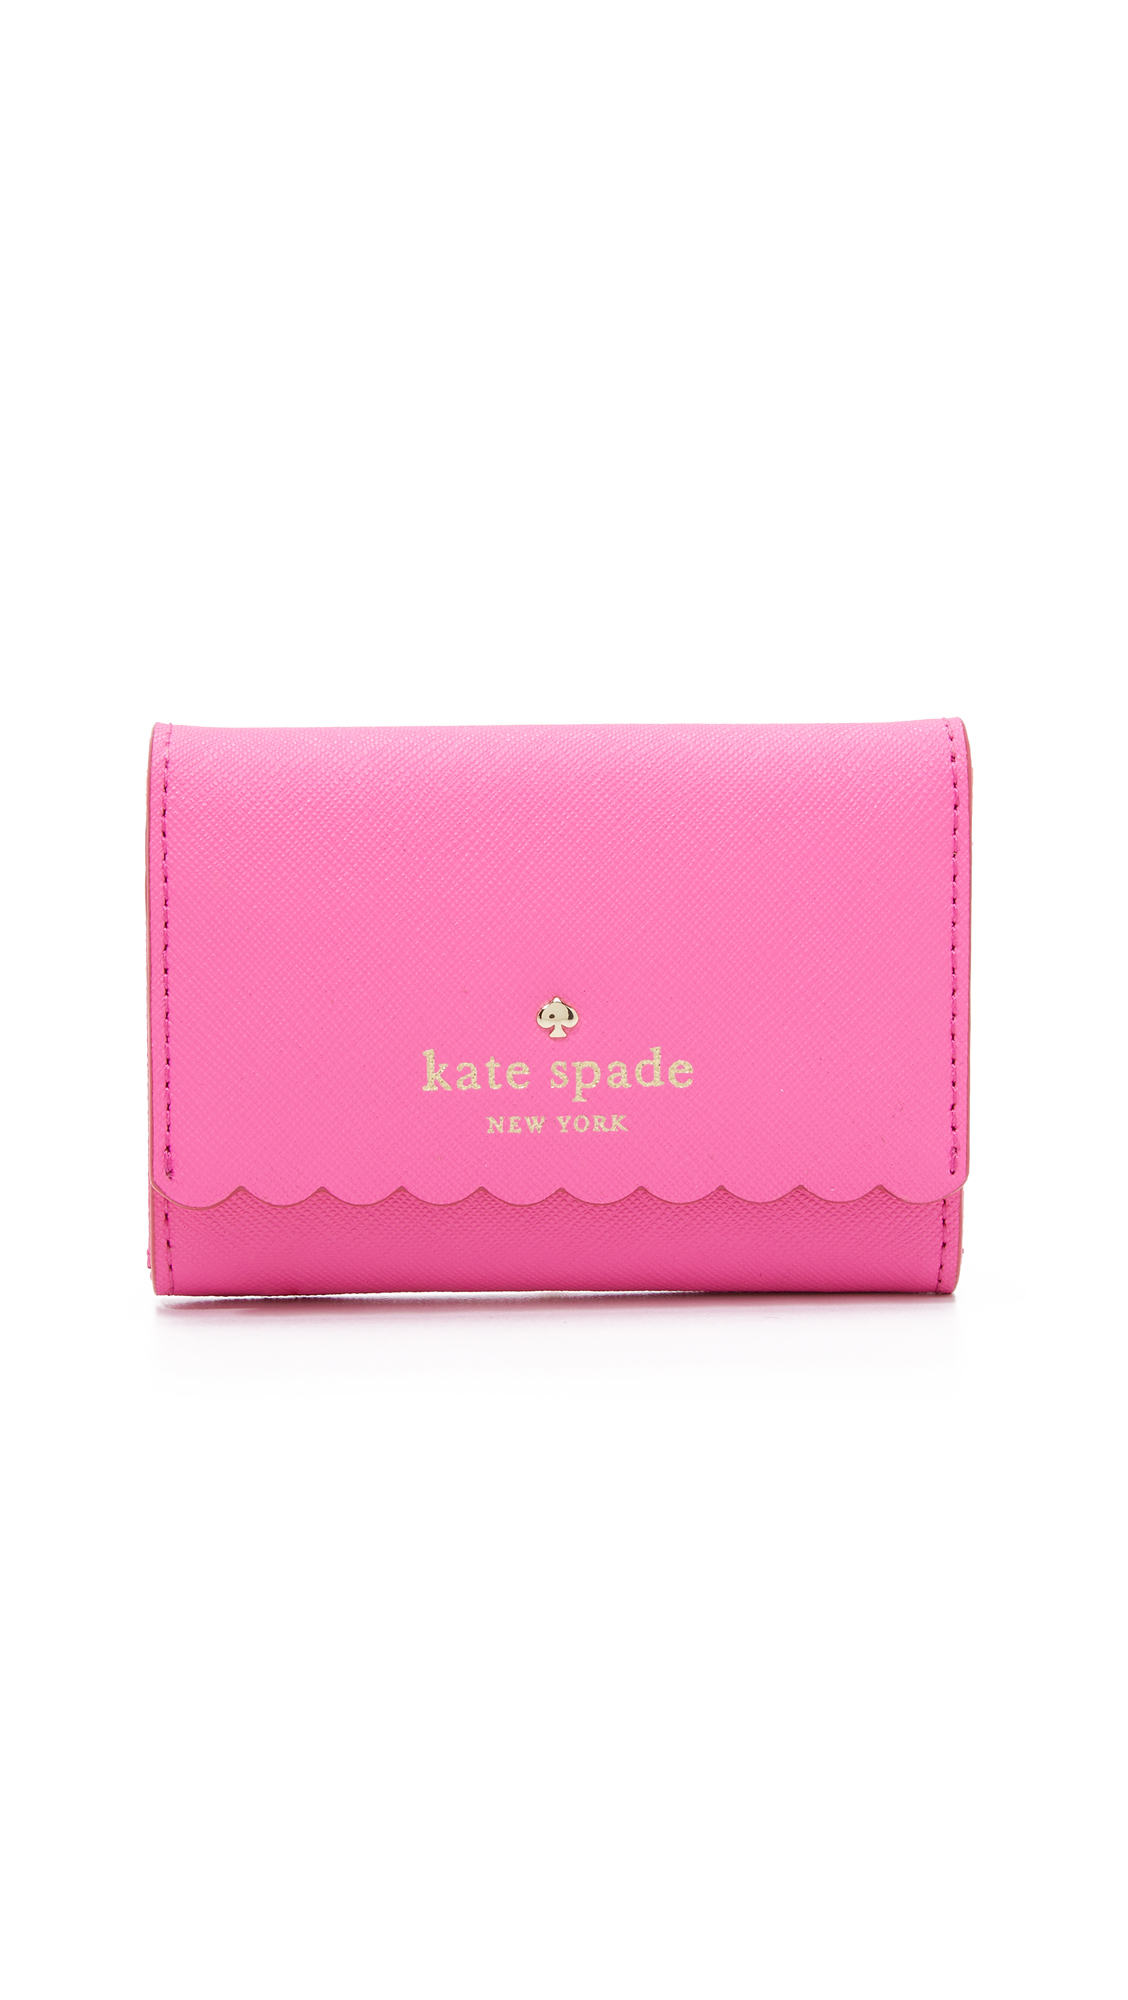 Kate spade new york Darla Small Wallet in Pink | Lyst